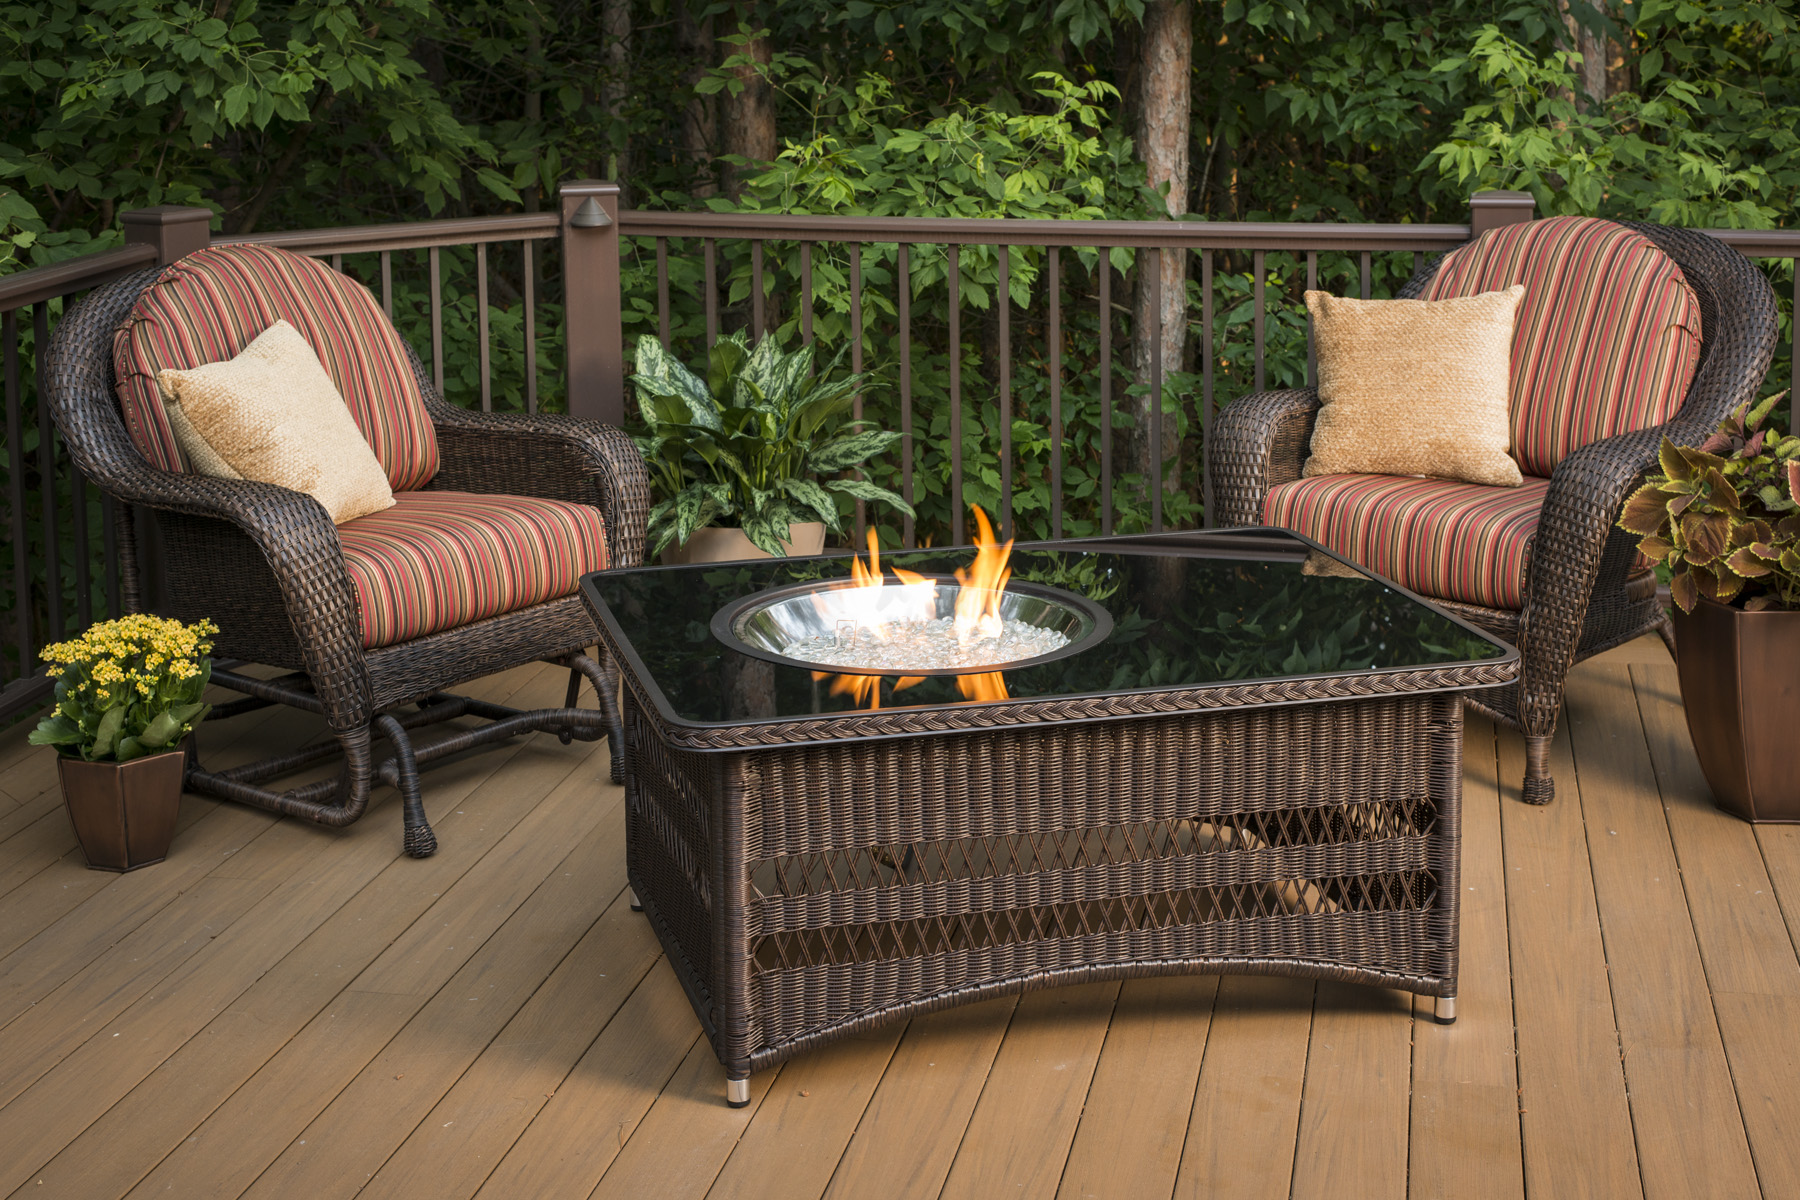 Deck Fire Pit Table Design And Ideas, Is It Safe To Use A Propane Fire Pit On Wooden Deck